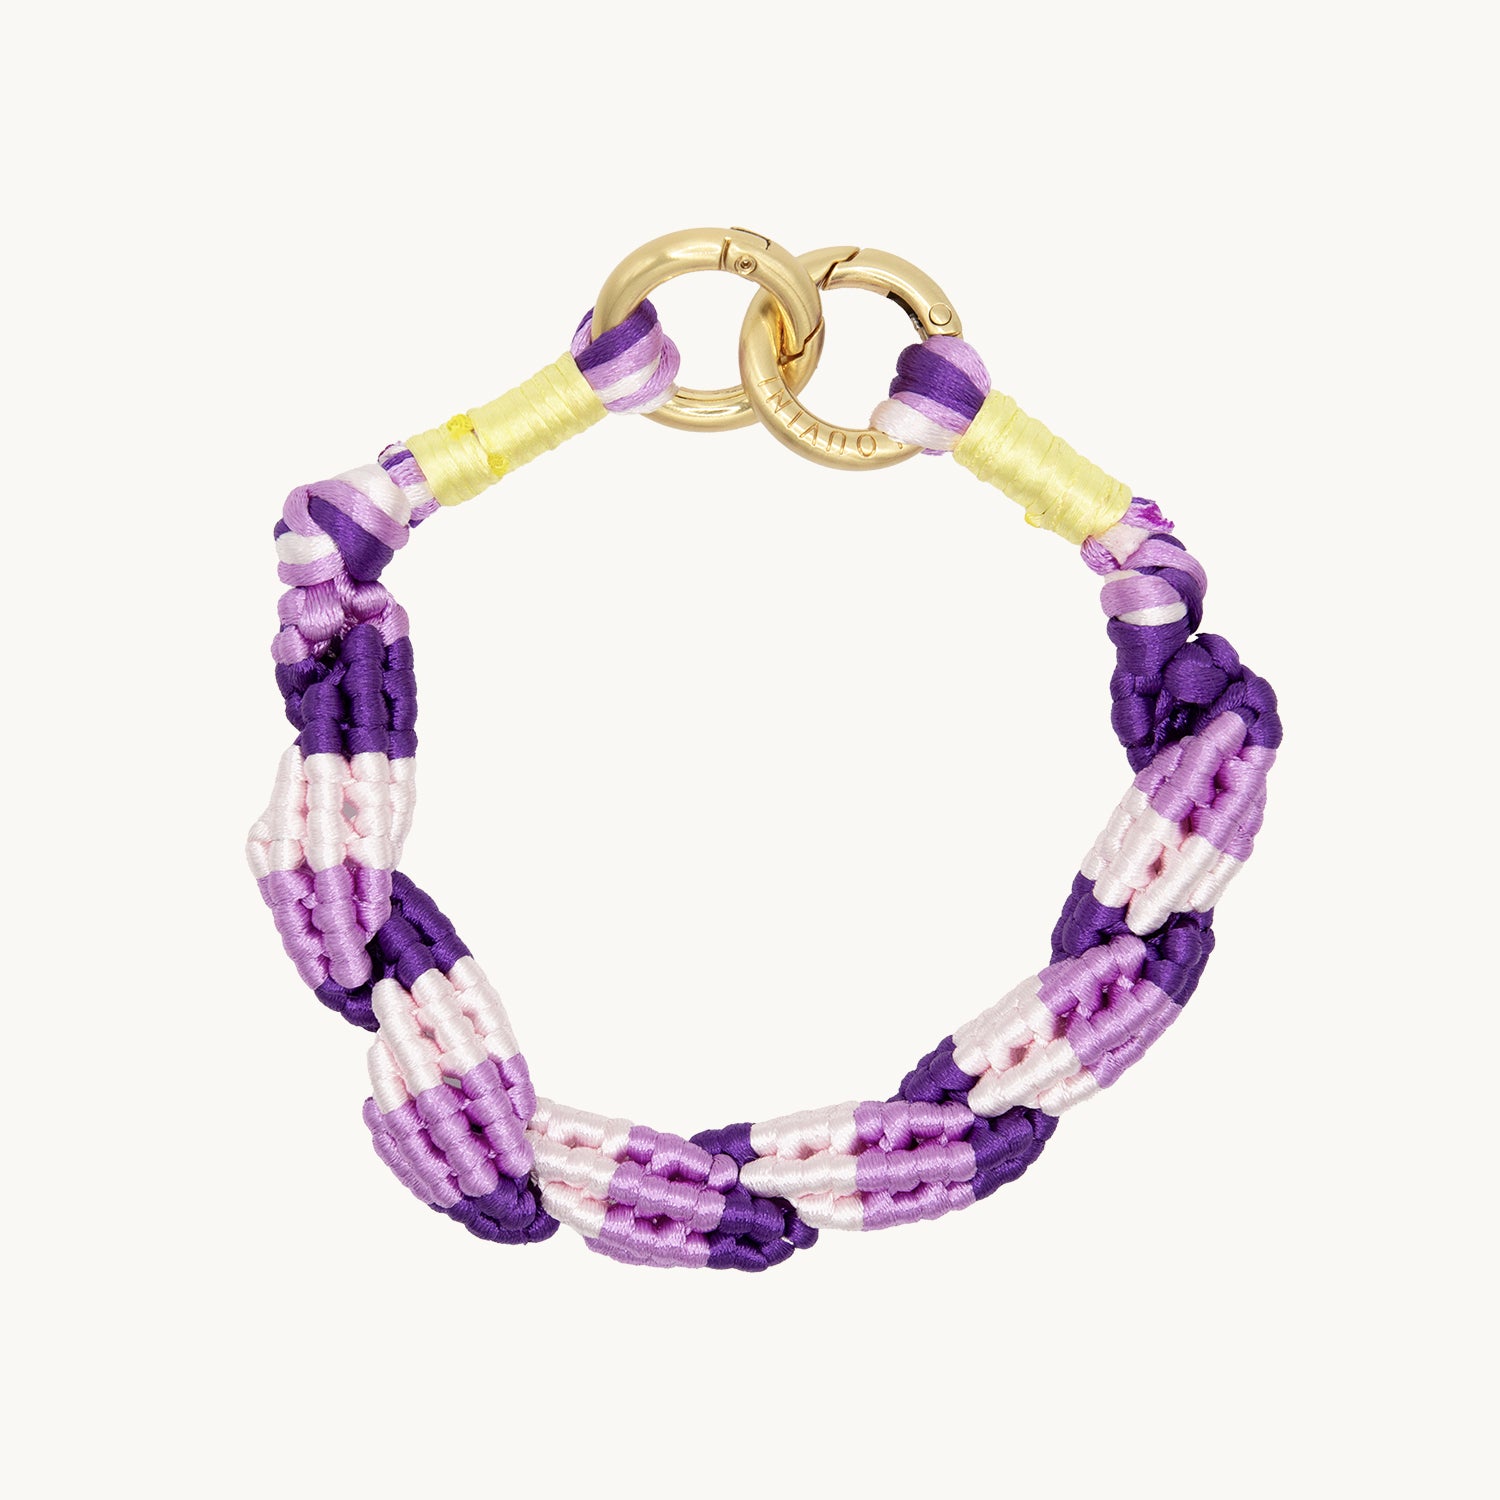 Charlie iPhone Case & LAYLA Purple Woven Cord